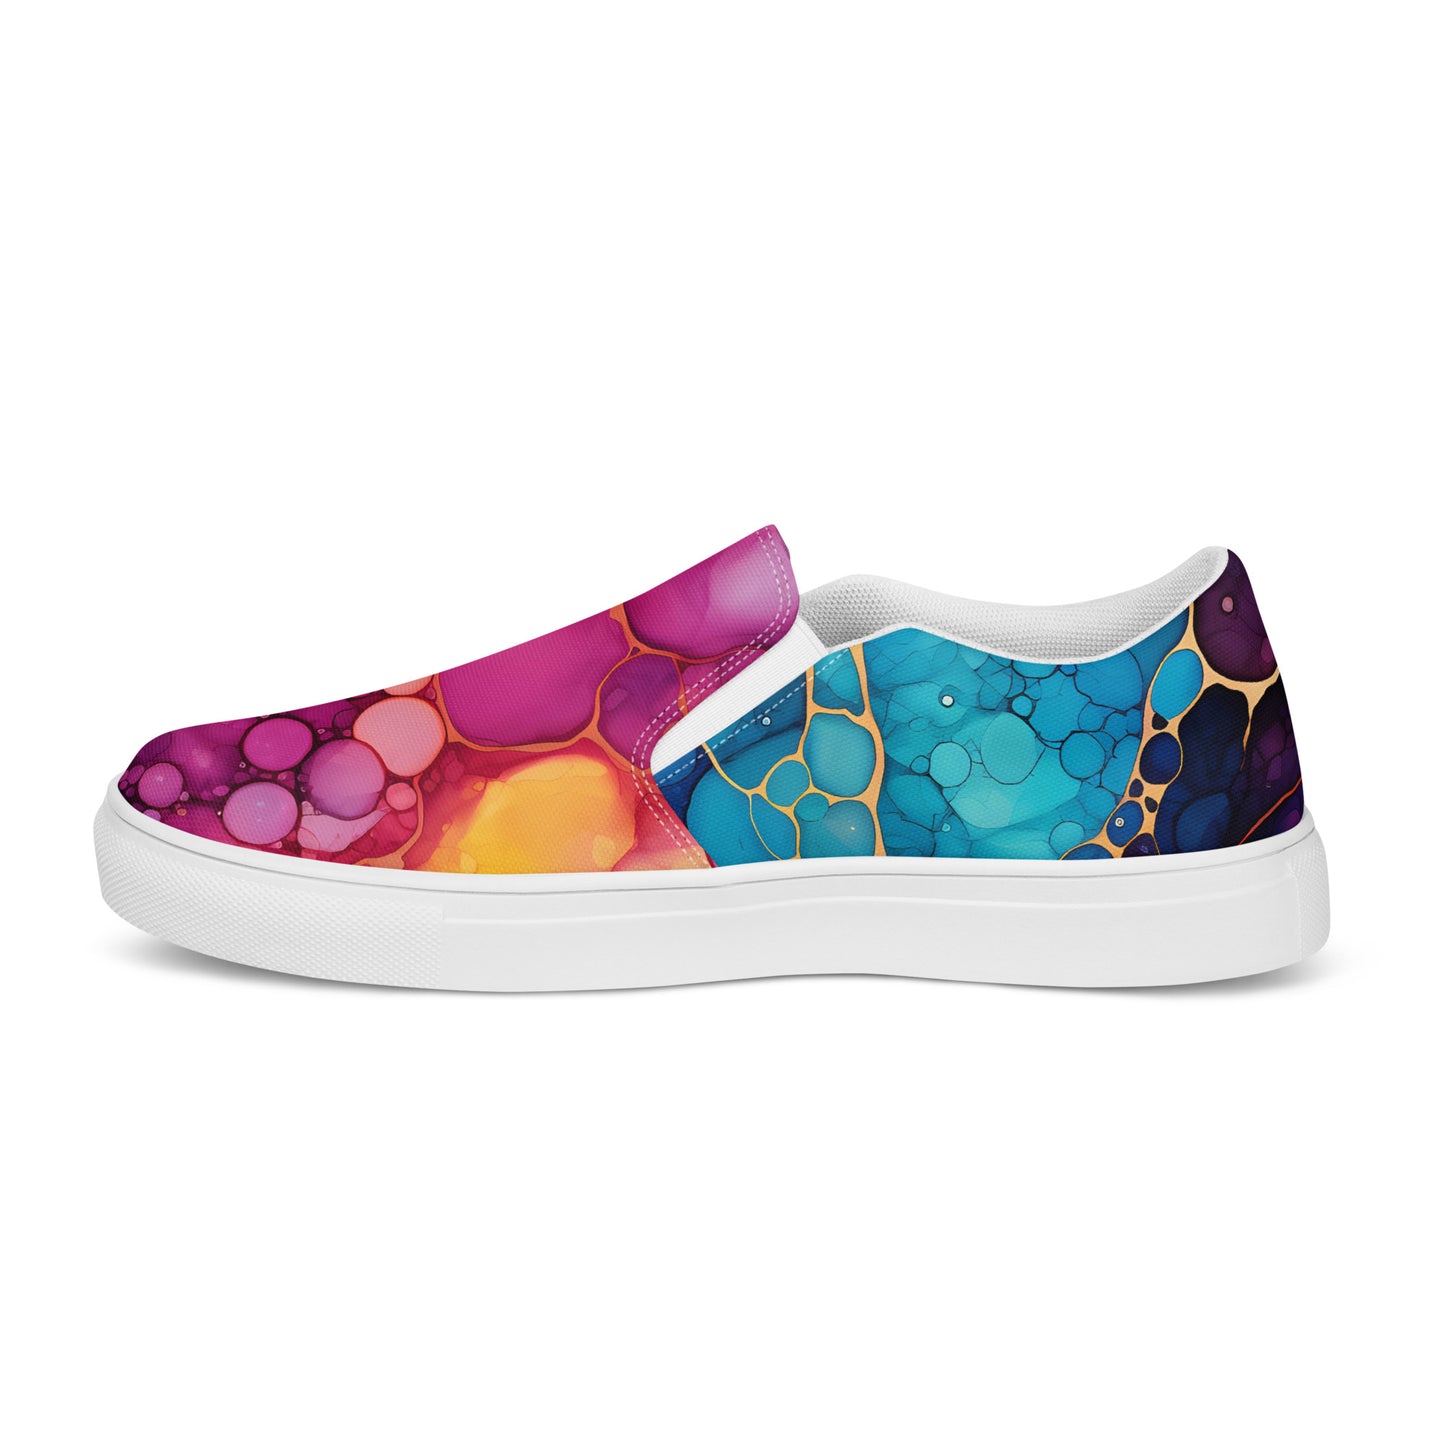 Alcohol Ink Explosion Women’s slip-on canvas shoes CedarHill Country Market